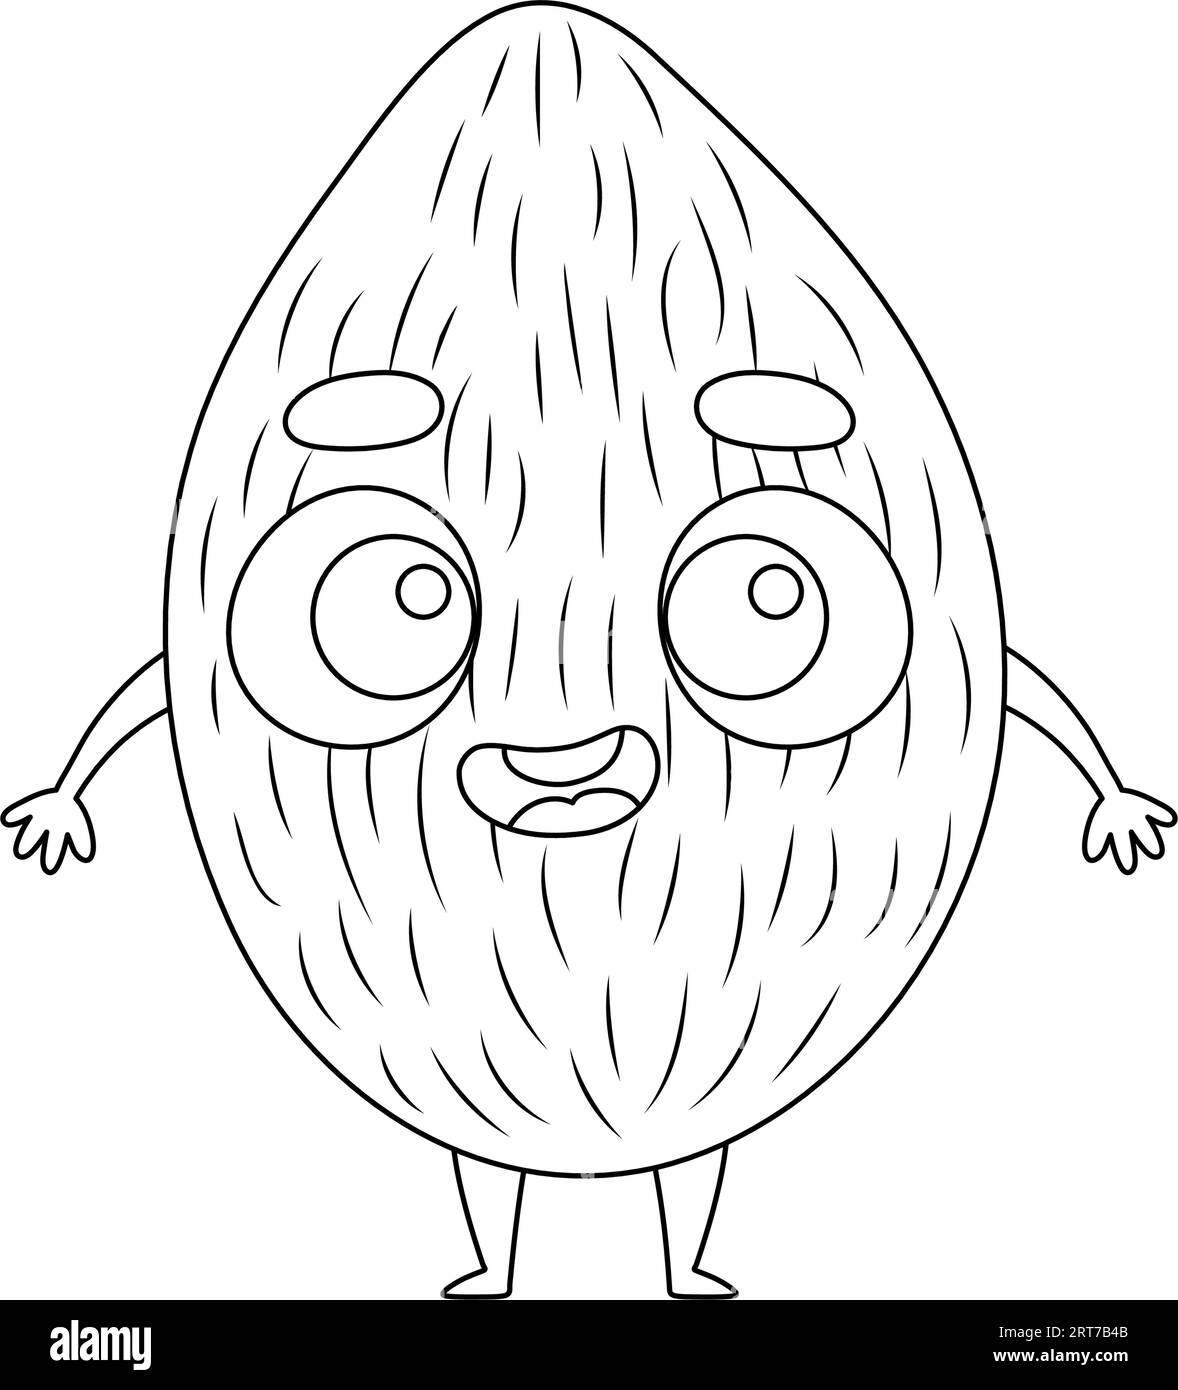 Coloring page funny coconut coloring book for kids educational activity for preschool years kids and toddlers with cute animal vector illustration stock vector image art